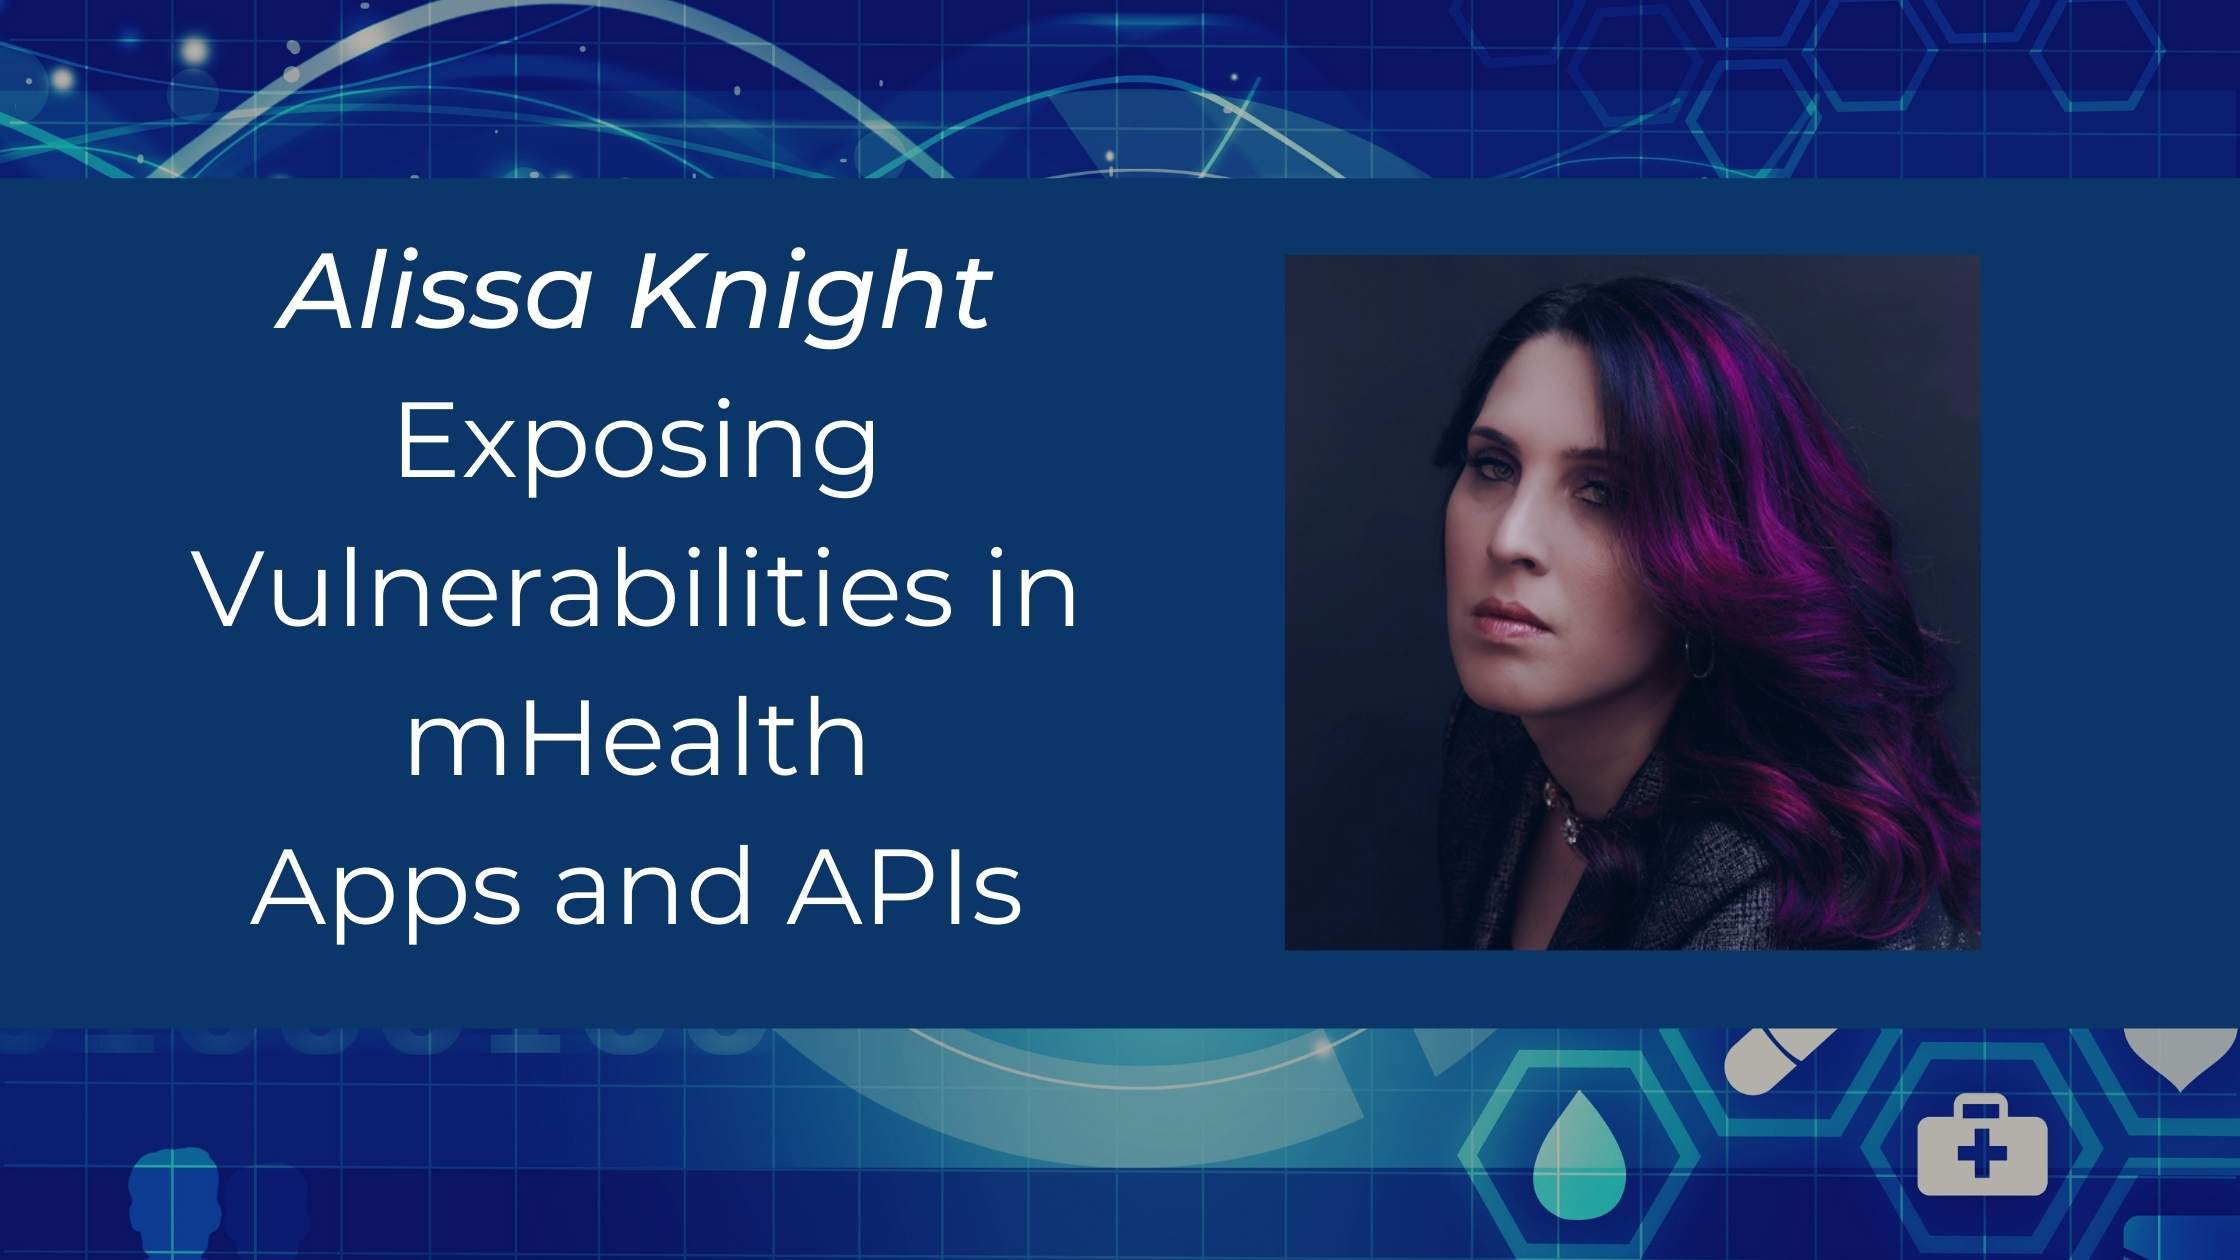 Blue medical technology themed background with text 'Exposing vulnerabilities in mHealth apps and APIs', photo of Alissa Knight